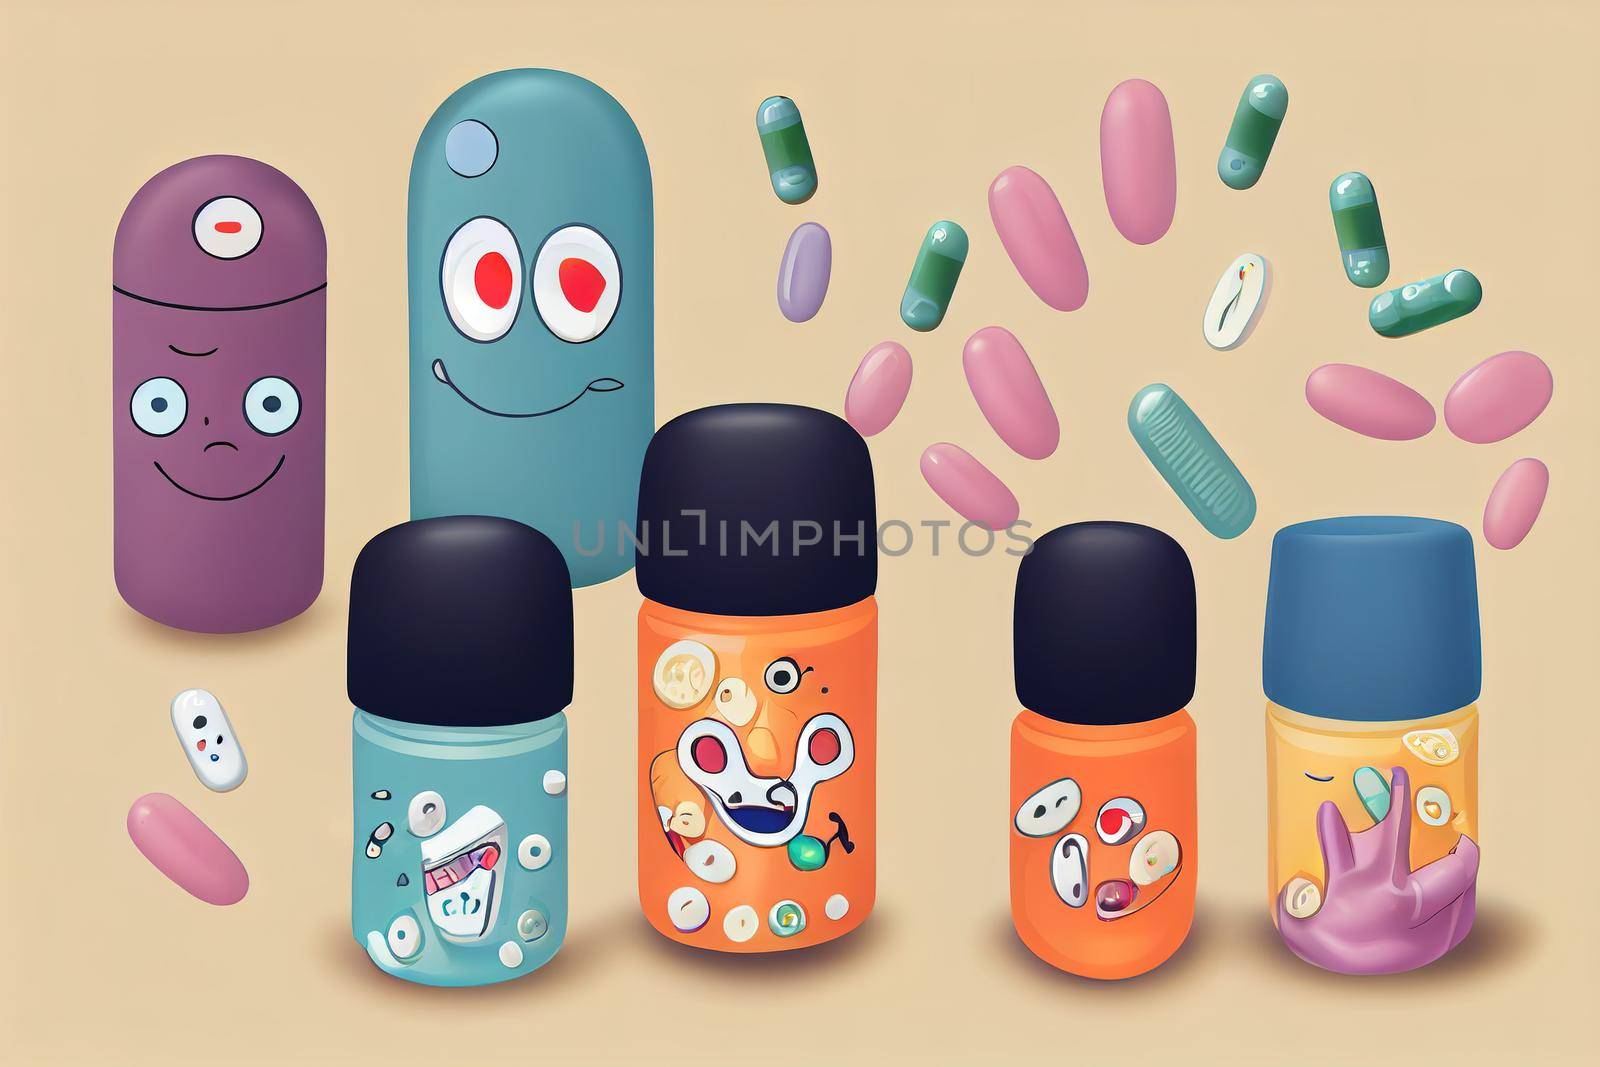 Cartoon pills characters, toon 2d style with cute toon eyes.